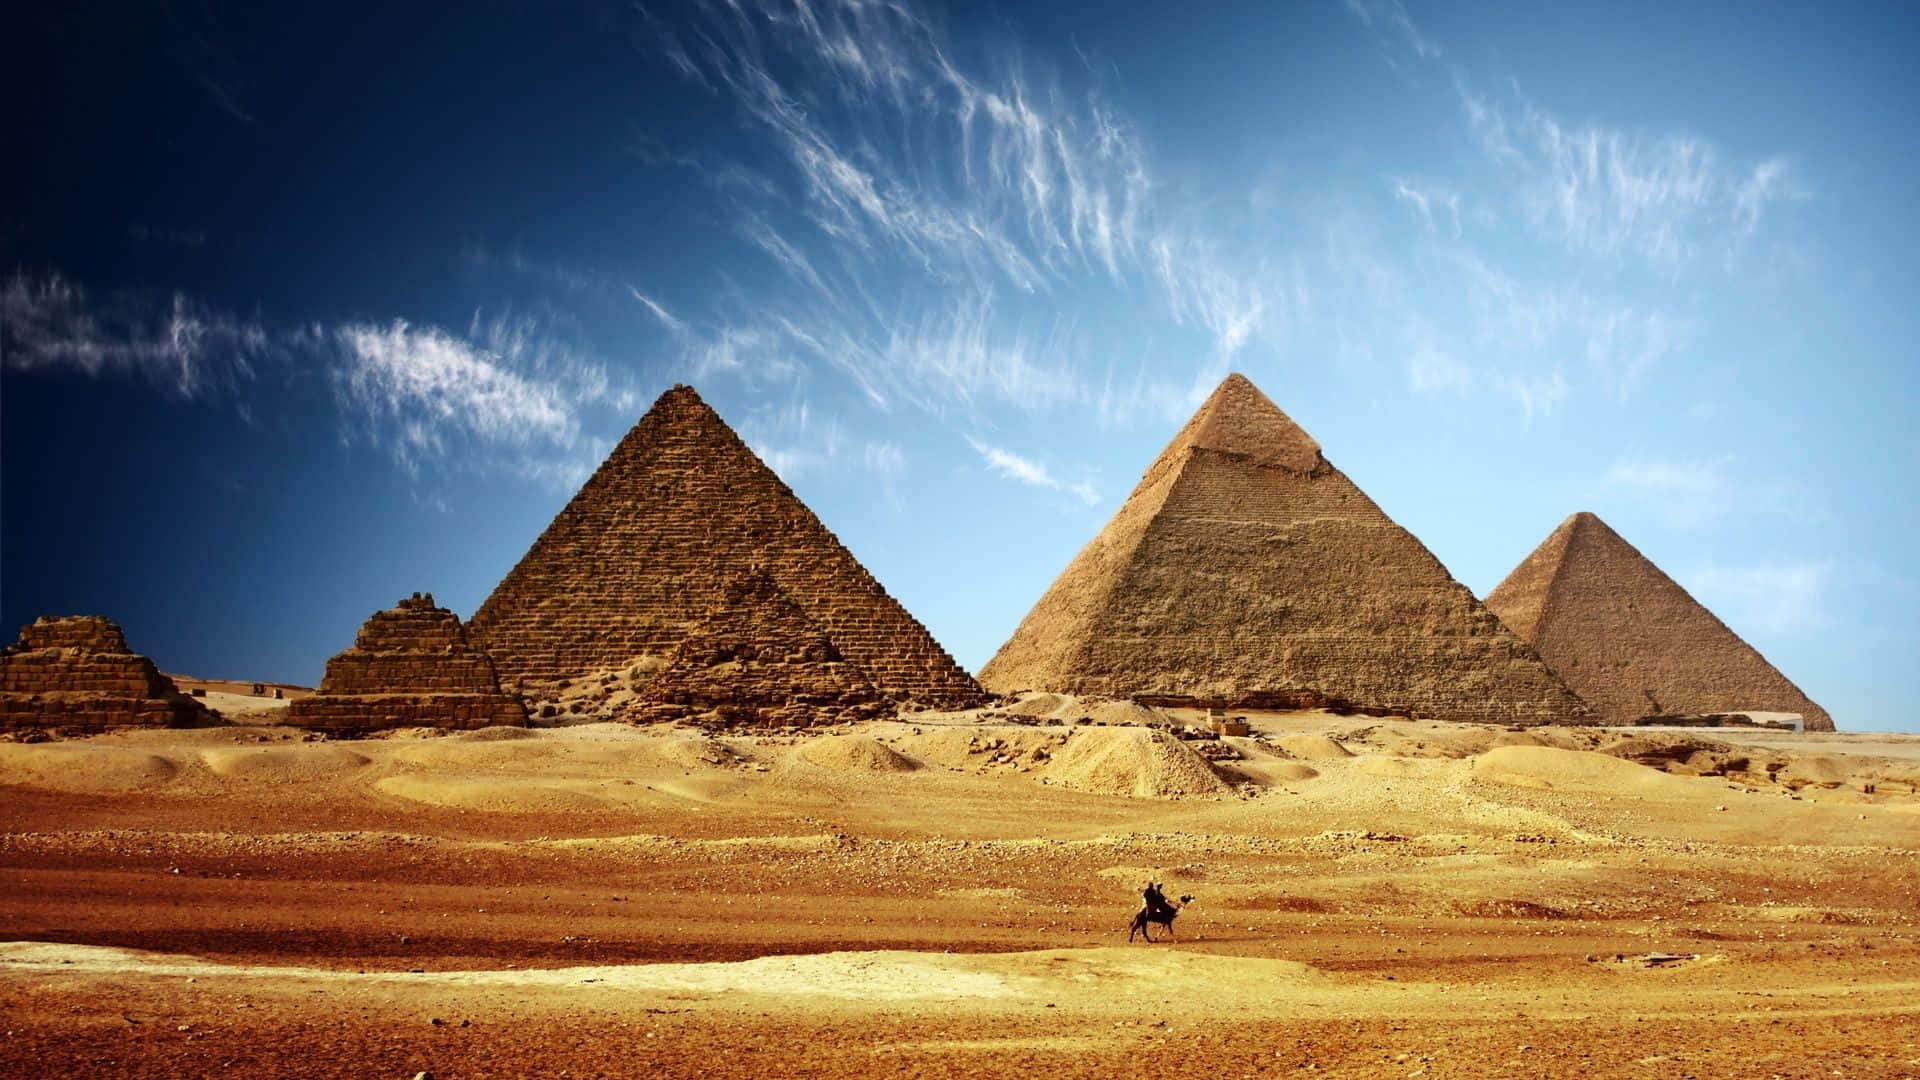 A Man Walks Through The Desert With The Pyramids In The Background Wallpaper